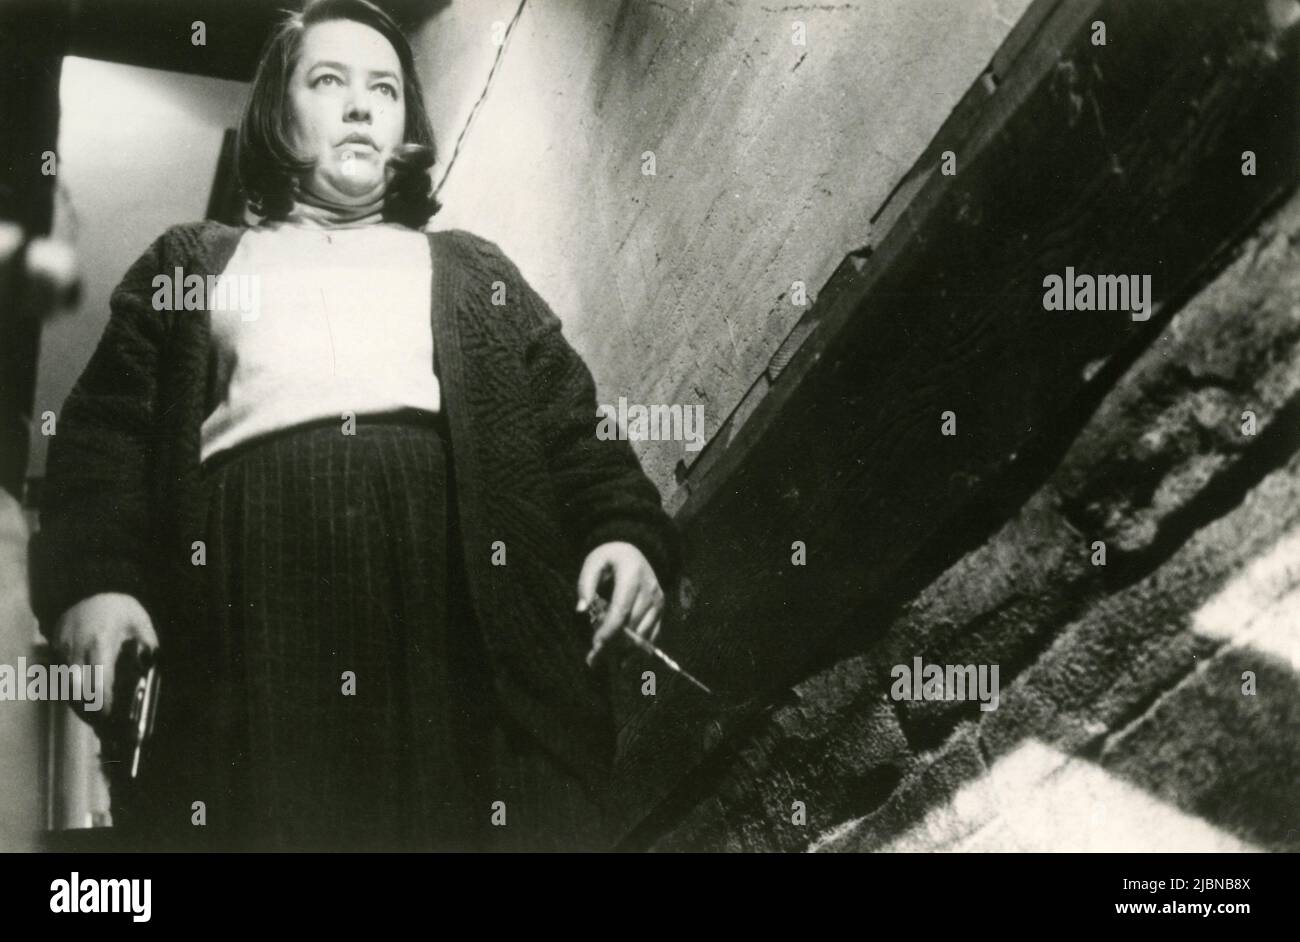 American actress Kathy Bates in the movie Misery, USA 1990 Stock Photo